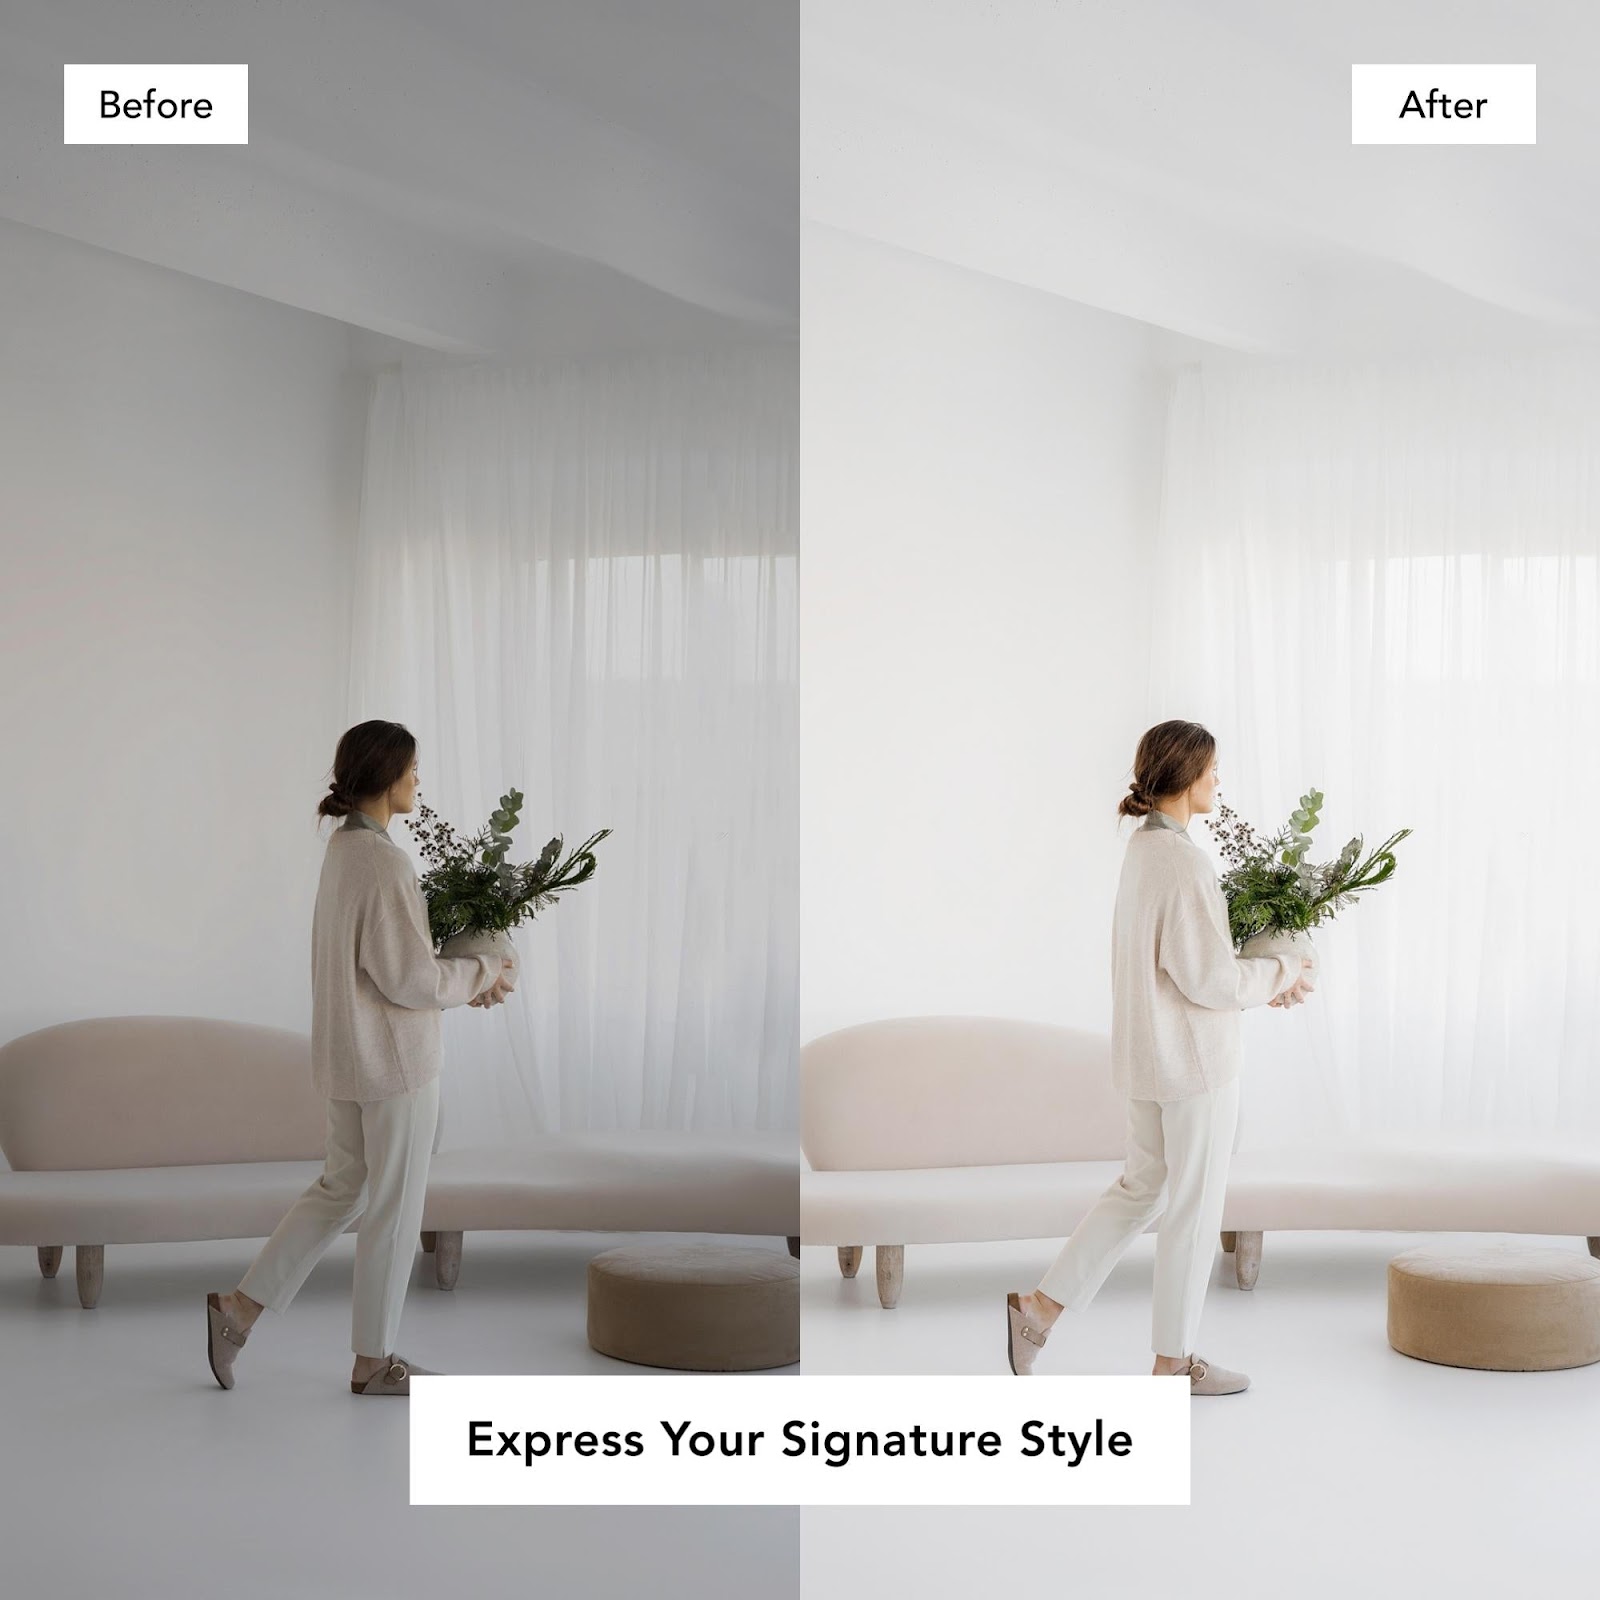 bright & airy flourish presets cover grid before after